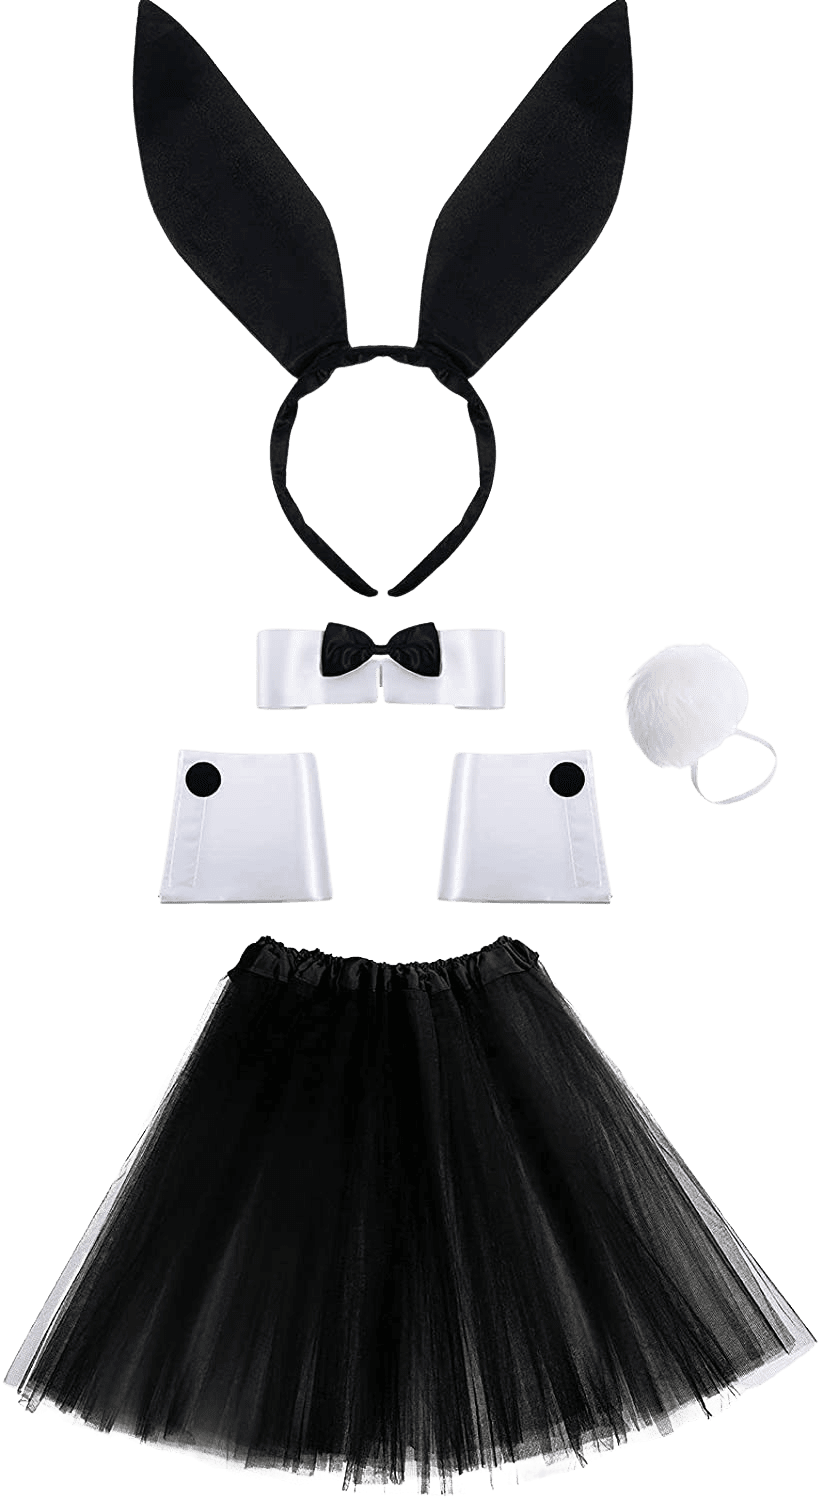 Women's Bunny Accessory Costume Set, Rabbit Ear Headband, Cuffs, Collar Bow Tie, Rabbit Tail for Halloween Christmas | Decor Gifts and More